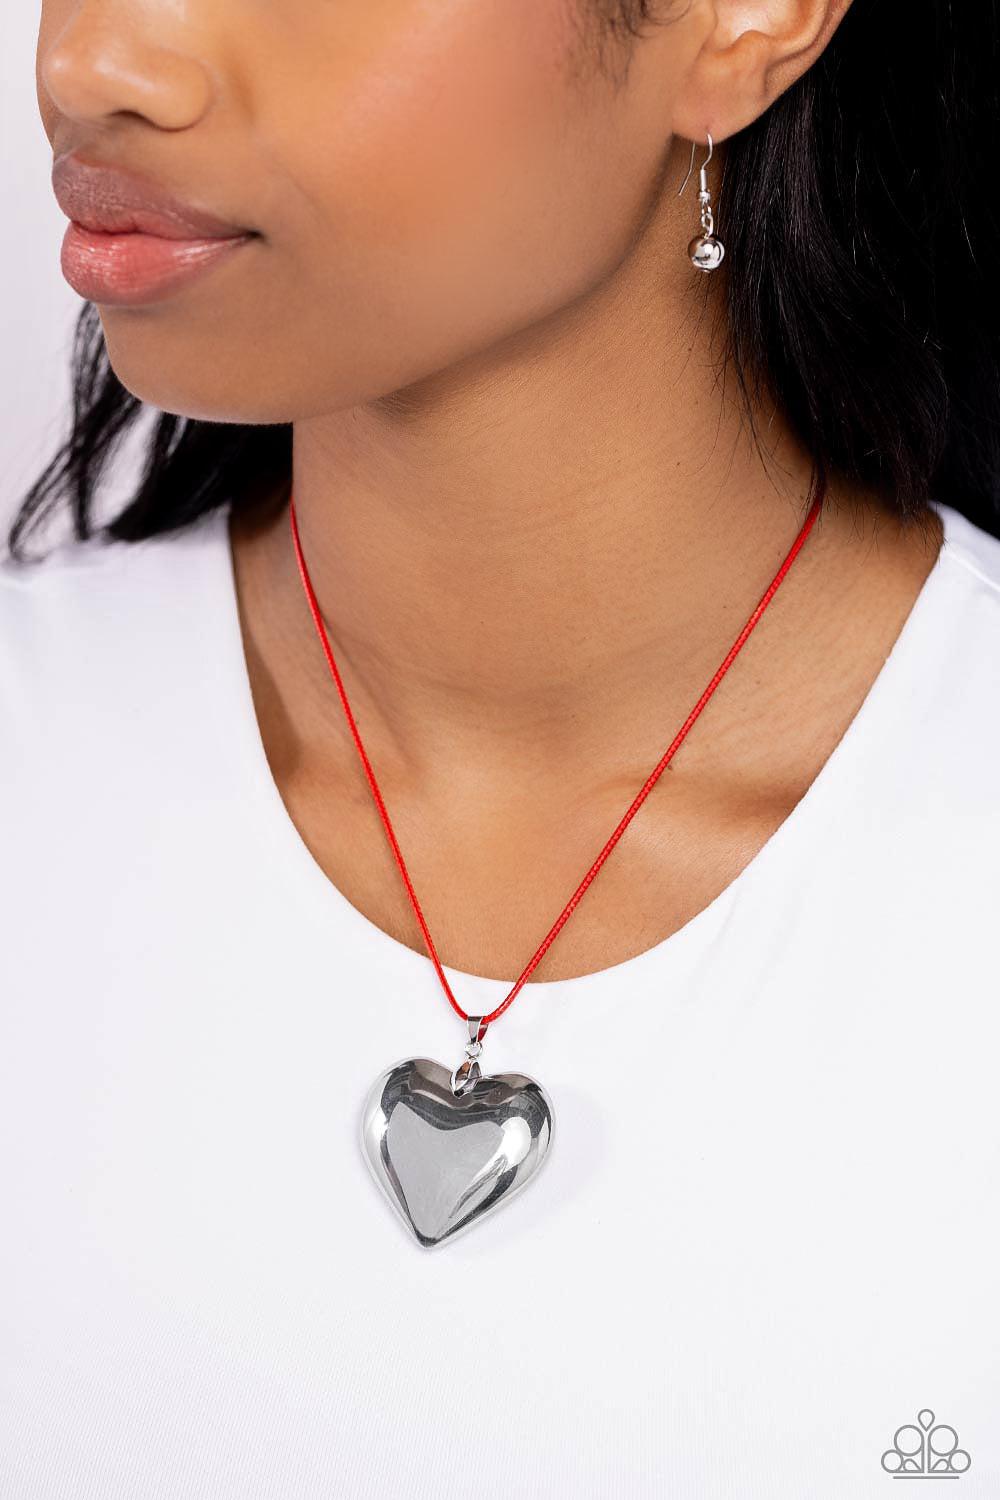 Devoted Daze Red &amp; Silver Heart Necklace - Paparazzi Accessories-on model - CarasShop.com - $5 Jewelry by Cara Jewels